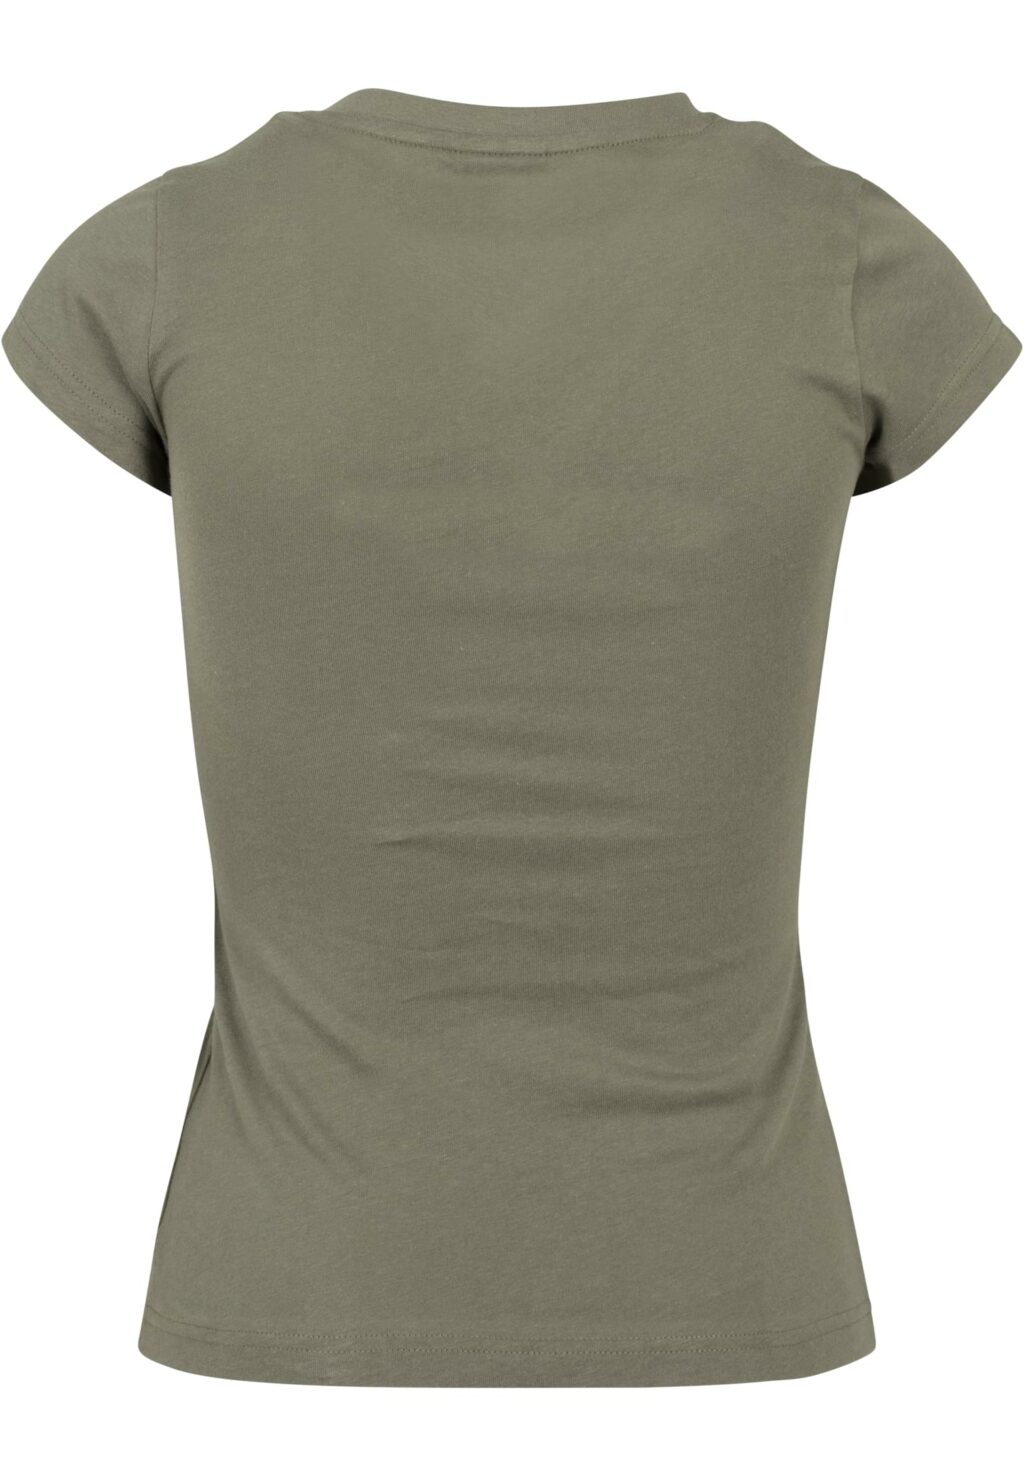 Ladies Waiting For Friday Box Tee olive MT2517